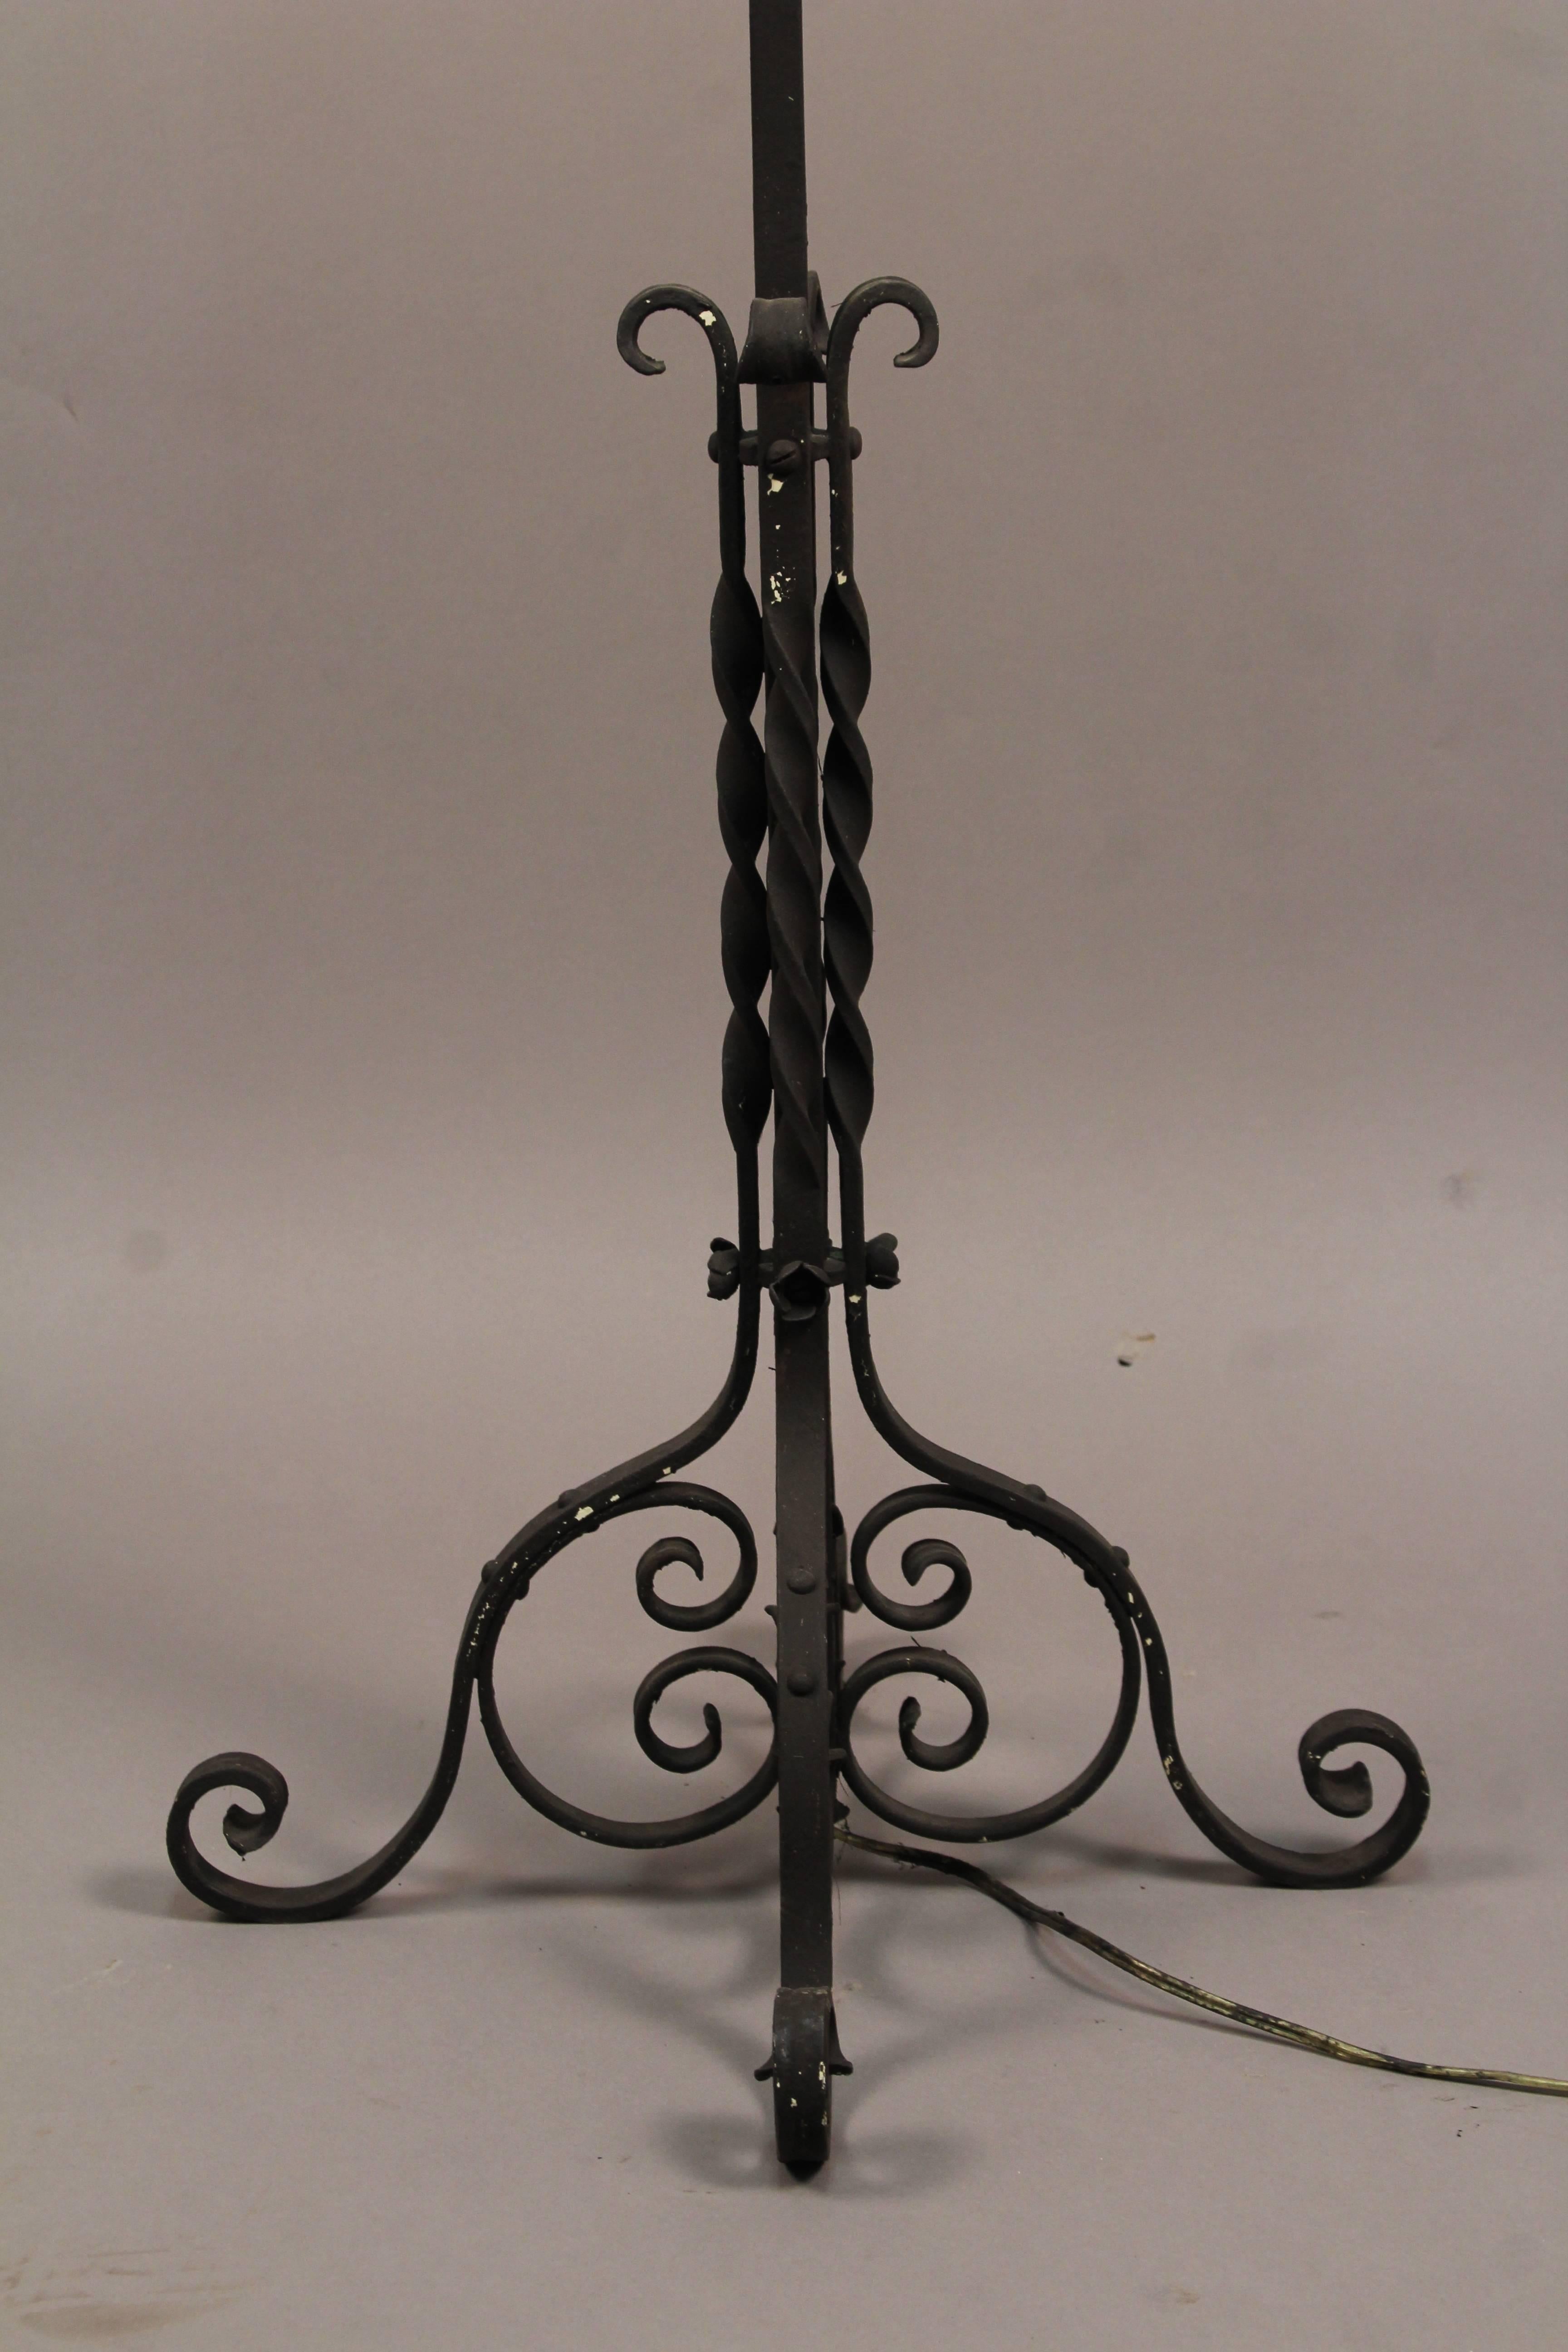 Spanish Colonial Spanish Revival 1920s Floor Lamp with Mica Shade